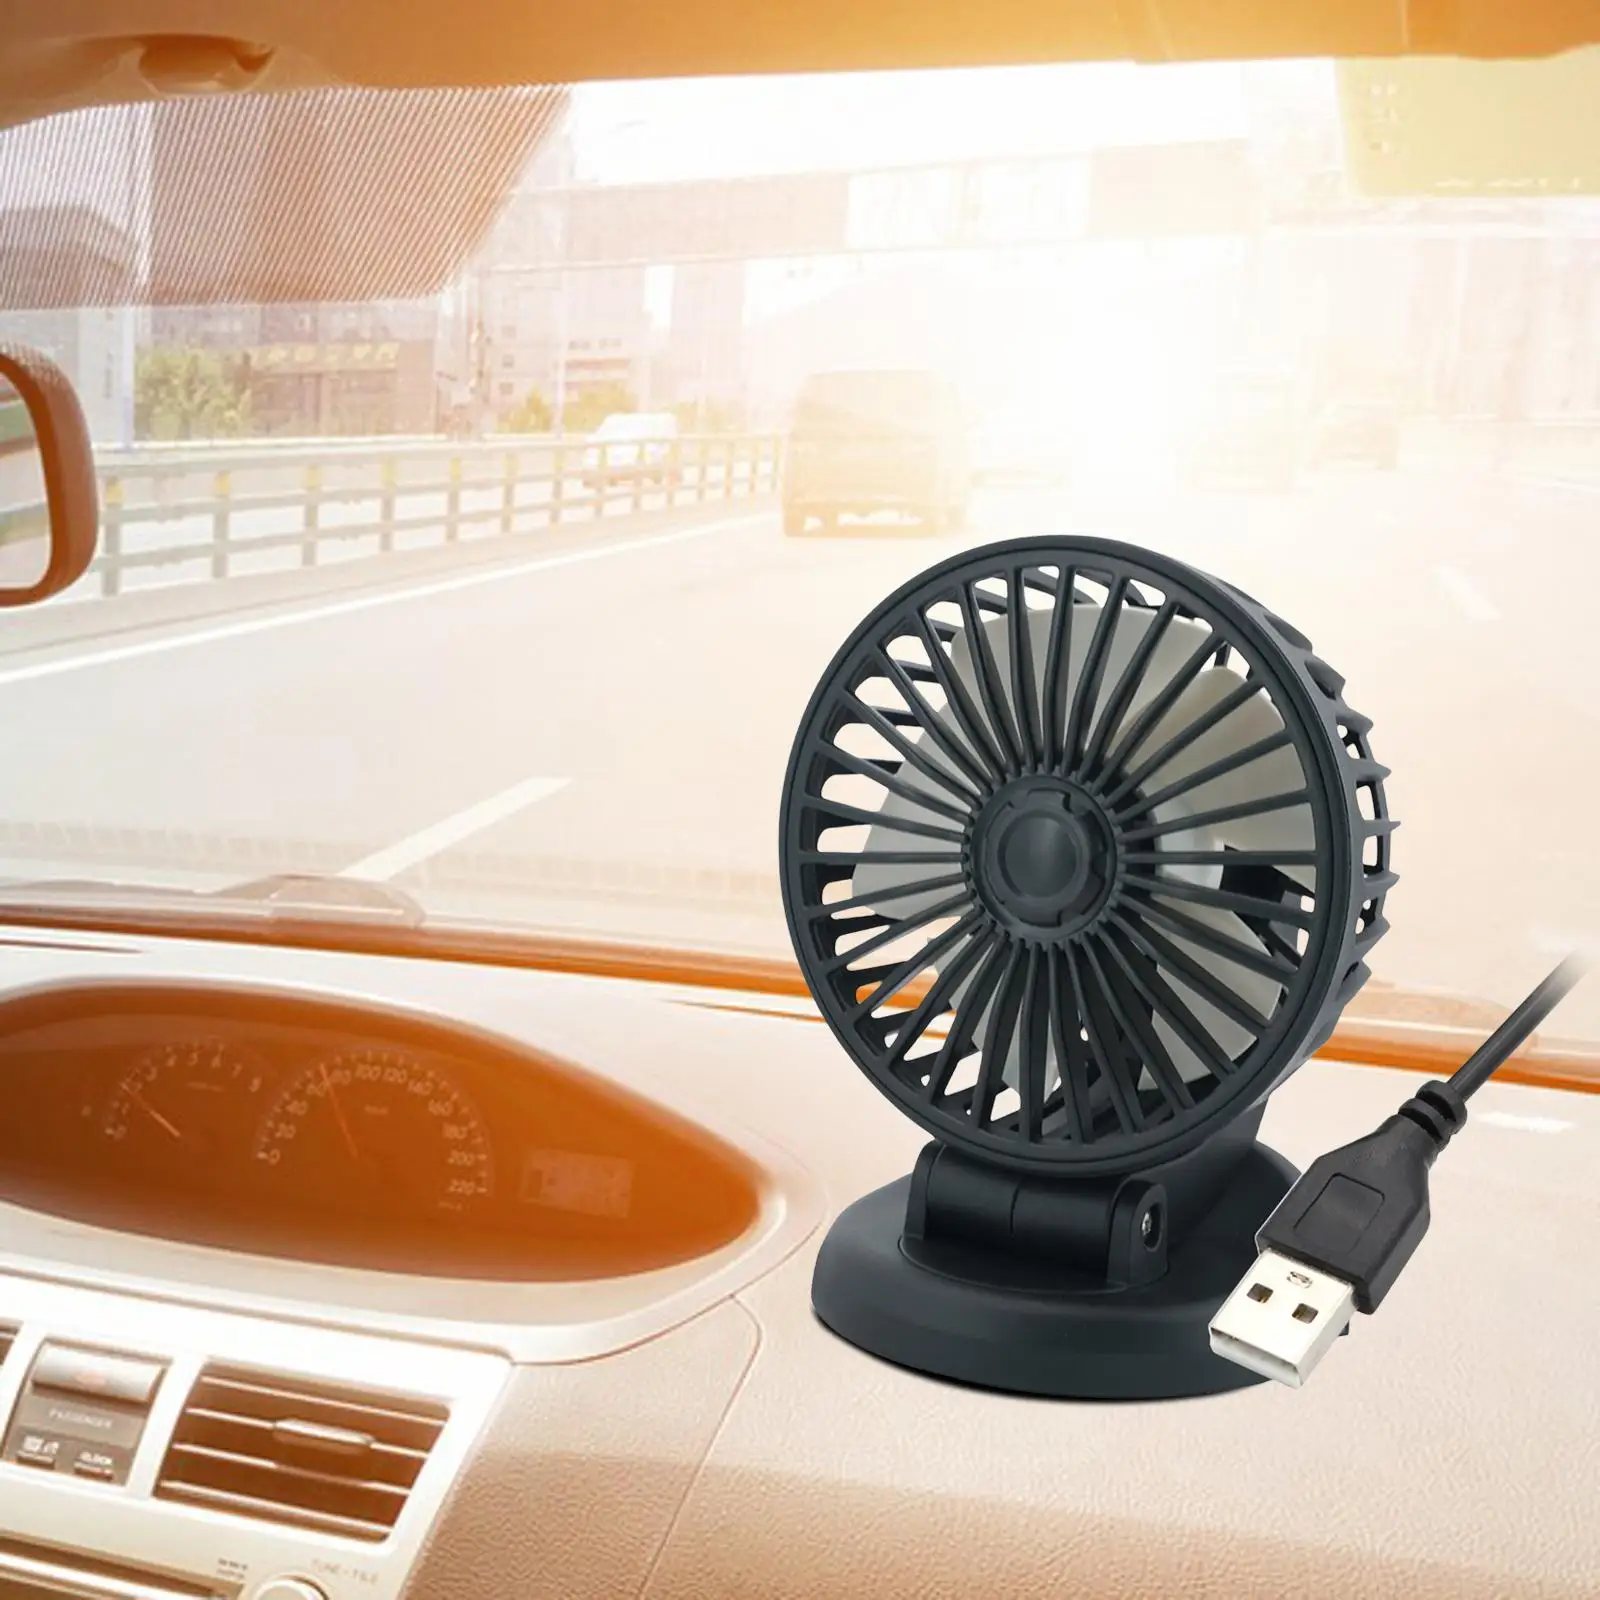 360 Degree Rotatable Electric Auto Seat Fan Auto Cooler Fan, Air Circulation Fan Portable Fan for Car for Vehicle Truck Van SUV